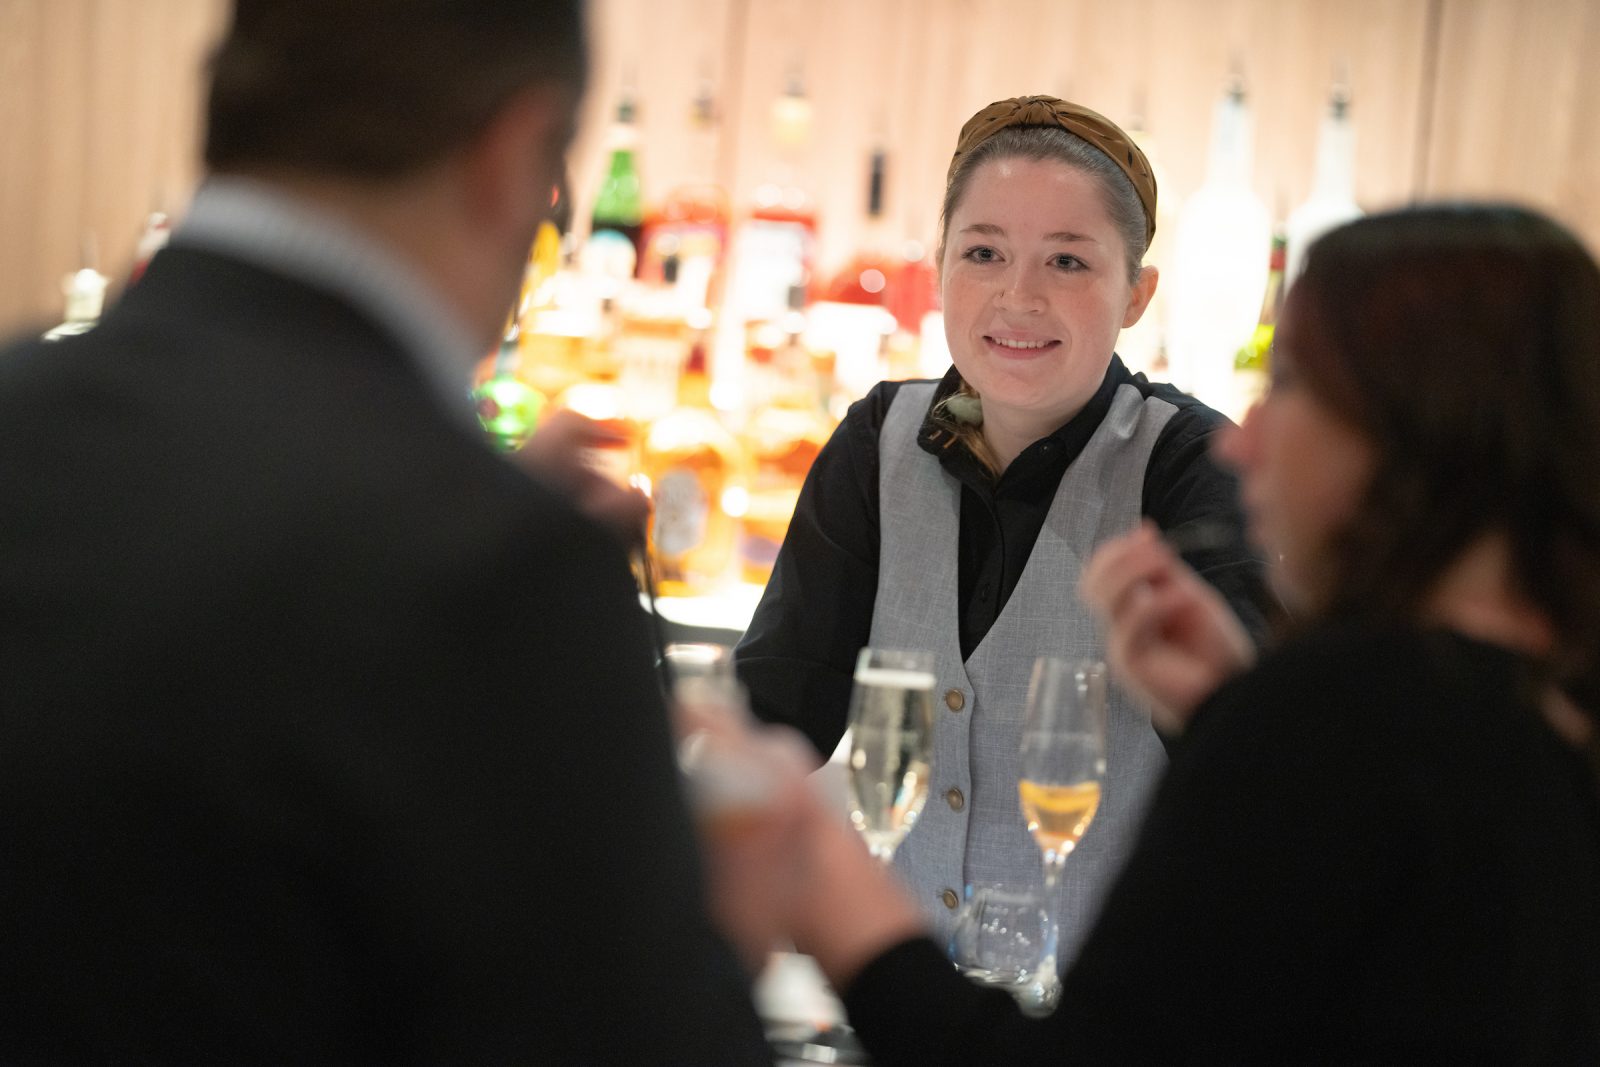 A bartender smiling at a group of people at a bar.